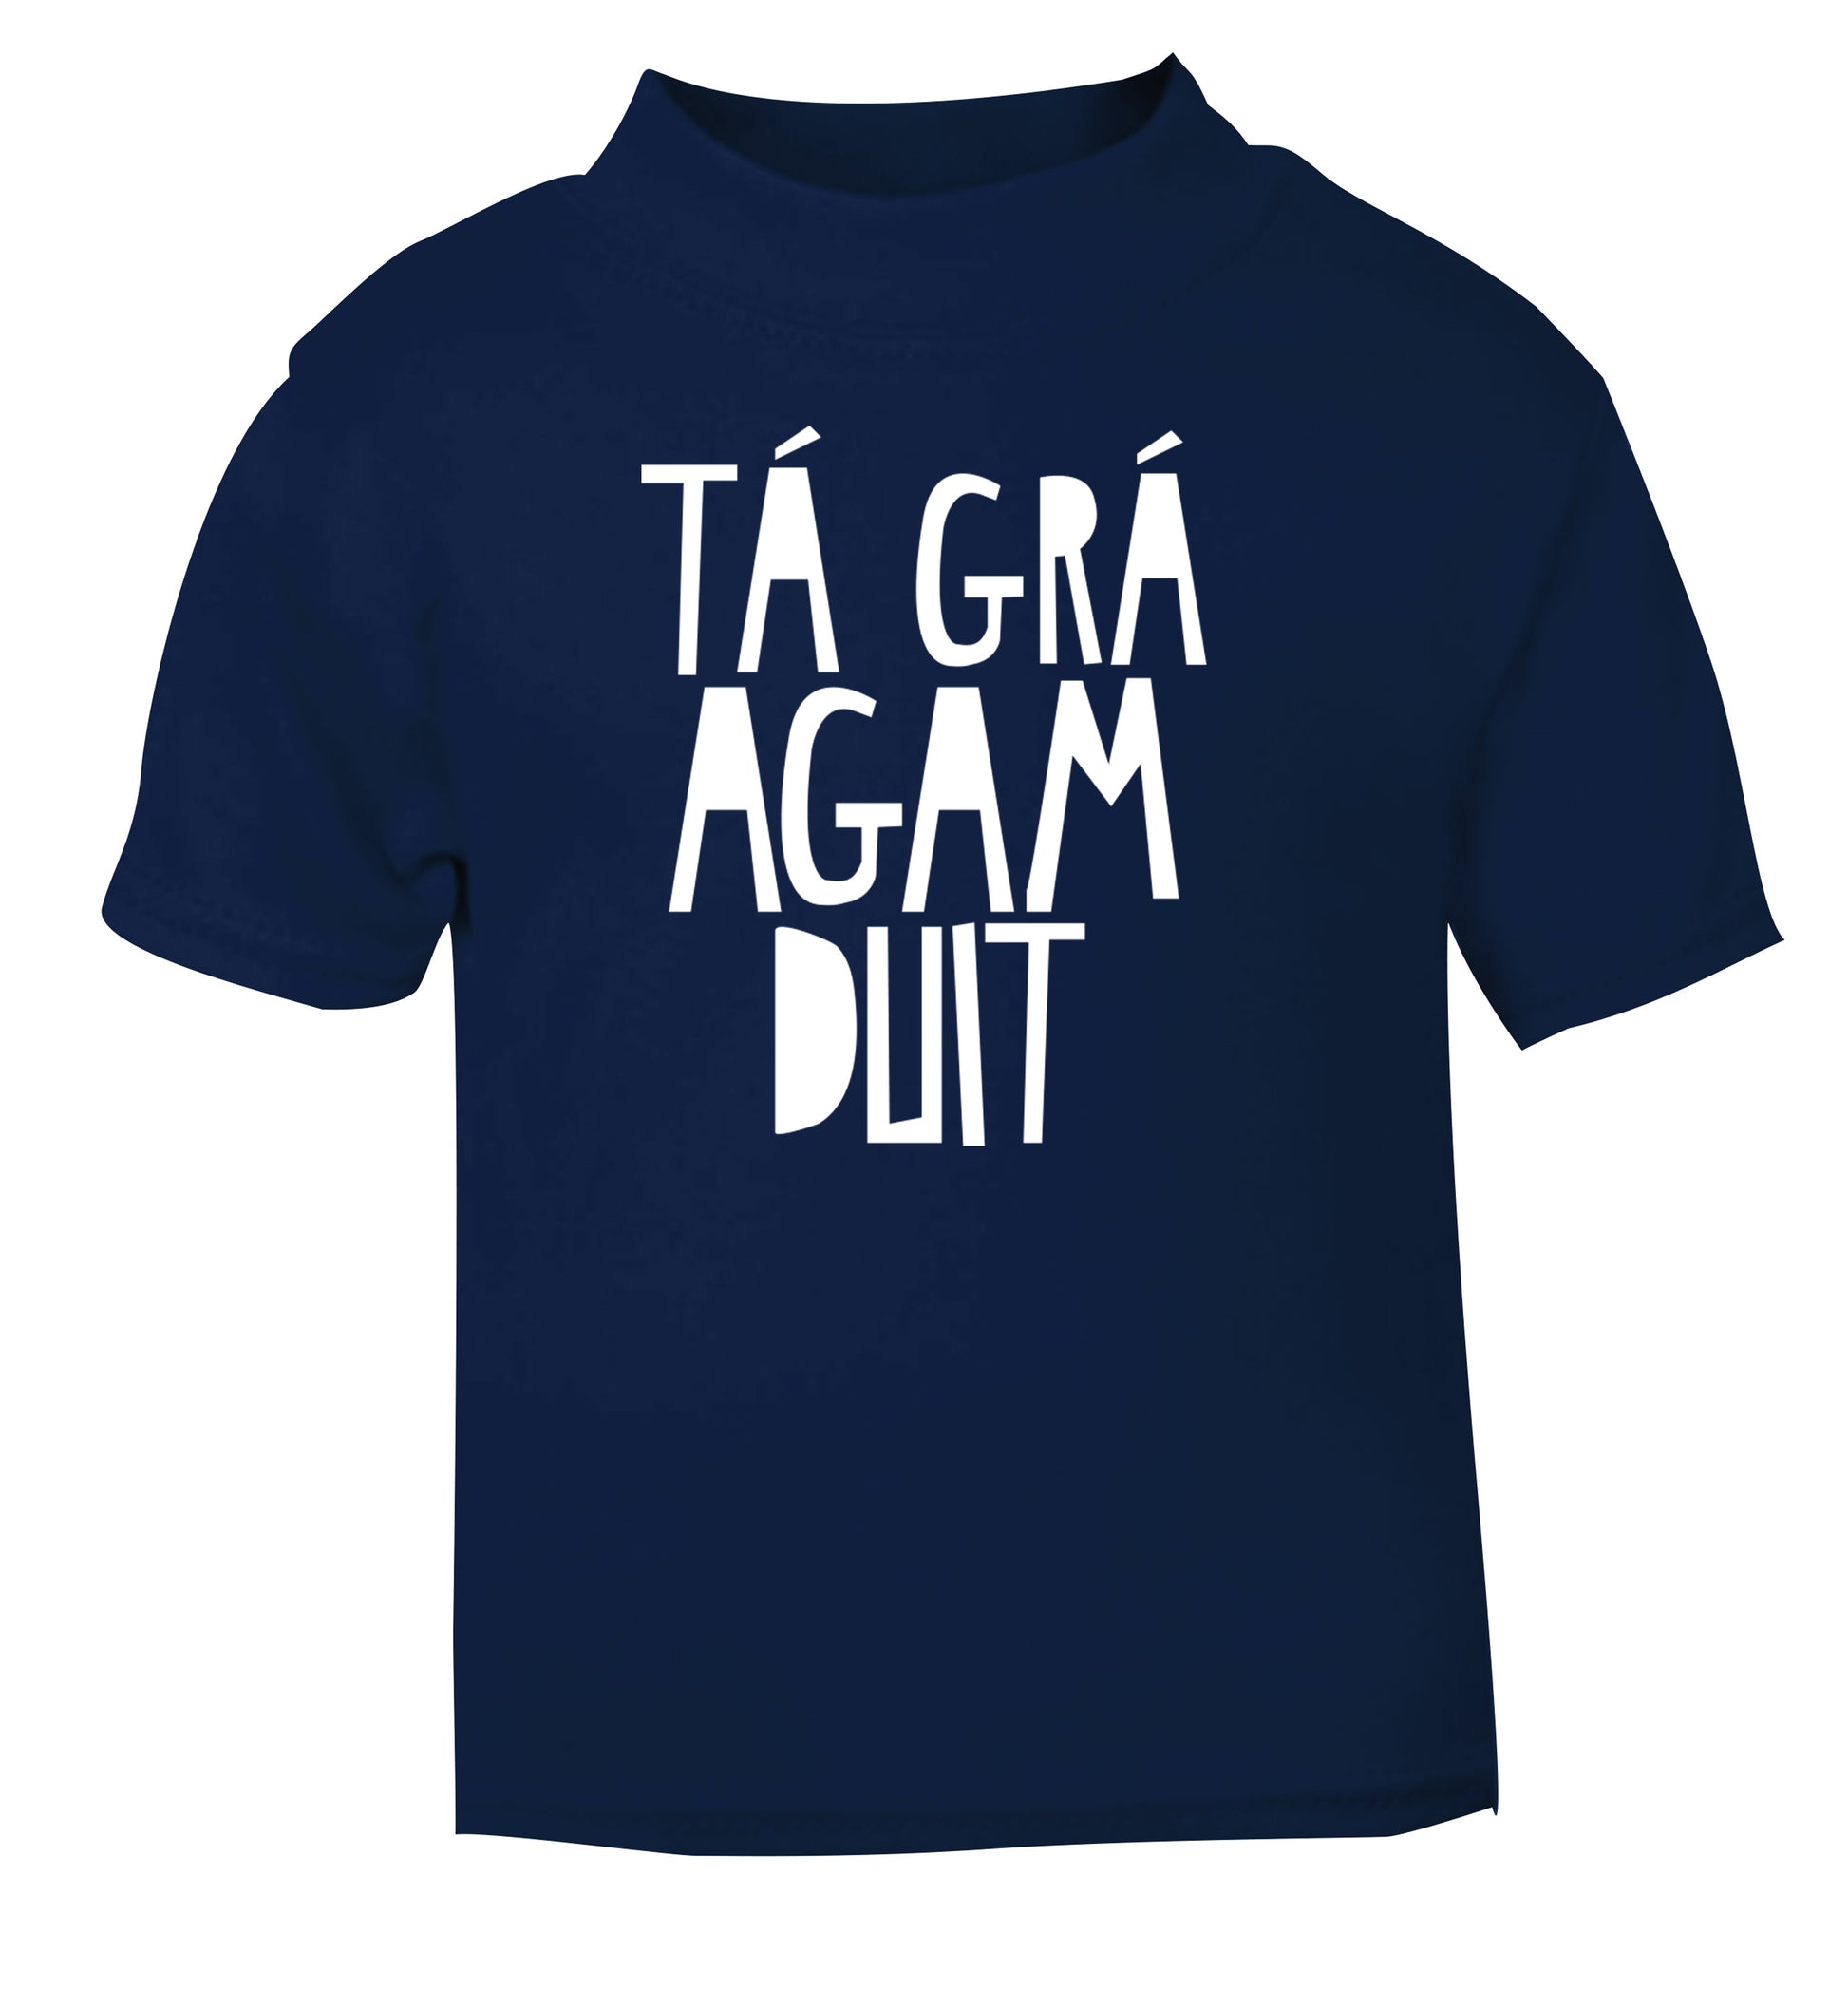 T‡ gr‡ agam duit - I love you navy Baby Toddler Tshirt 2 Years